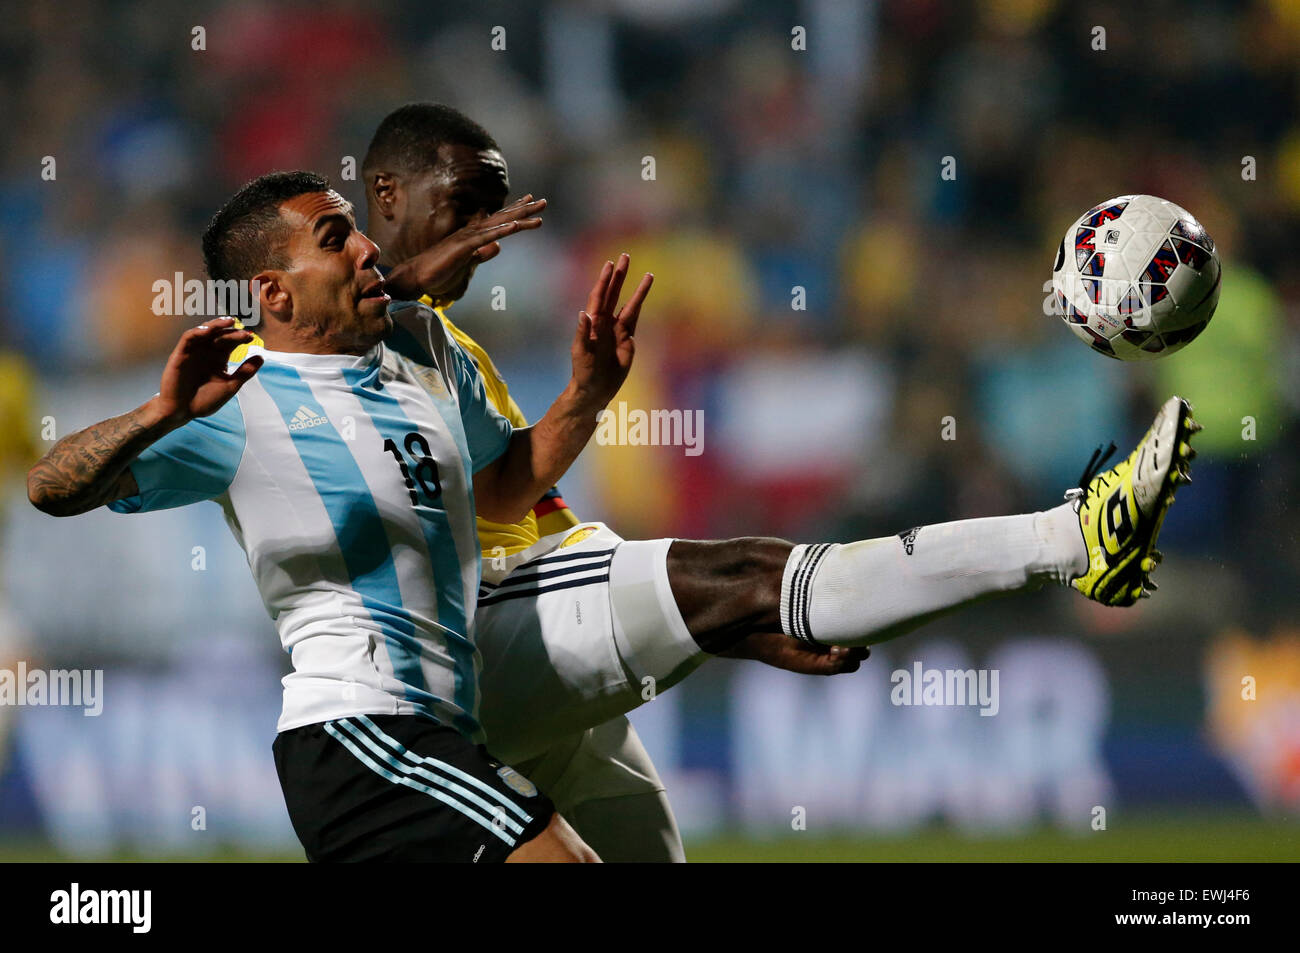 Vina Del Mar, Chile. 26th June, 2015. Argentina's Carlos Tevez (L) vies the ball with Colombia's Cristian Zapata during the quarterfinal match of the Copa America Chile 2015, held in the El Sausalito Stadium, in Vina del Mar city, Chile, on June 26, 2015. Argentina won 5-4 on penalties. Credit:  Jorge Villegas/Xinhua/Alamy Live News Stock Photo